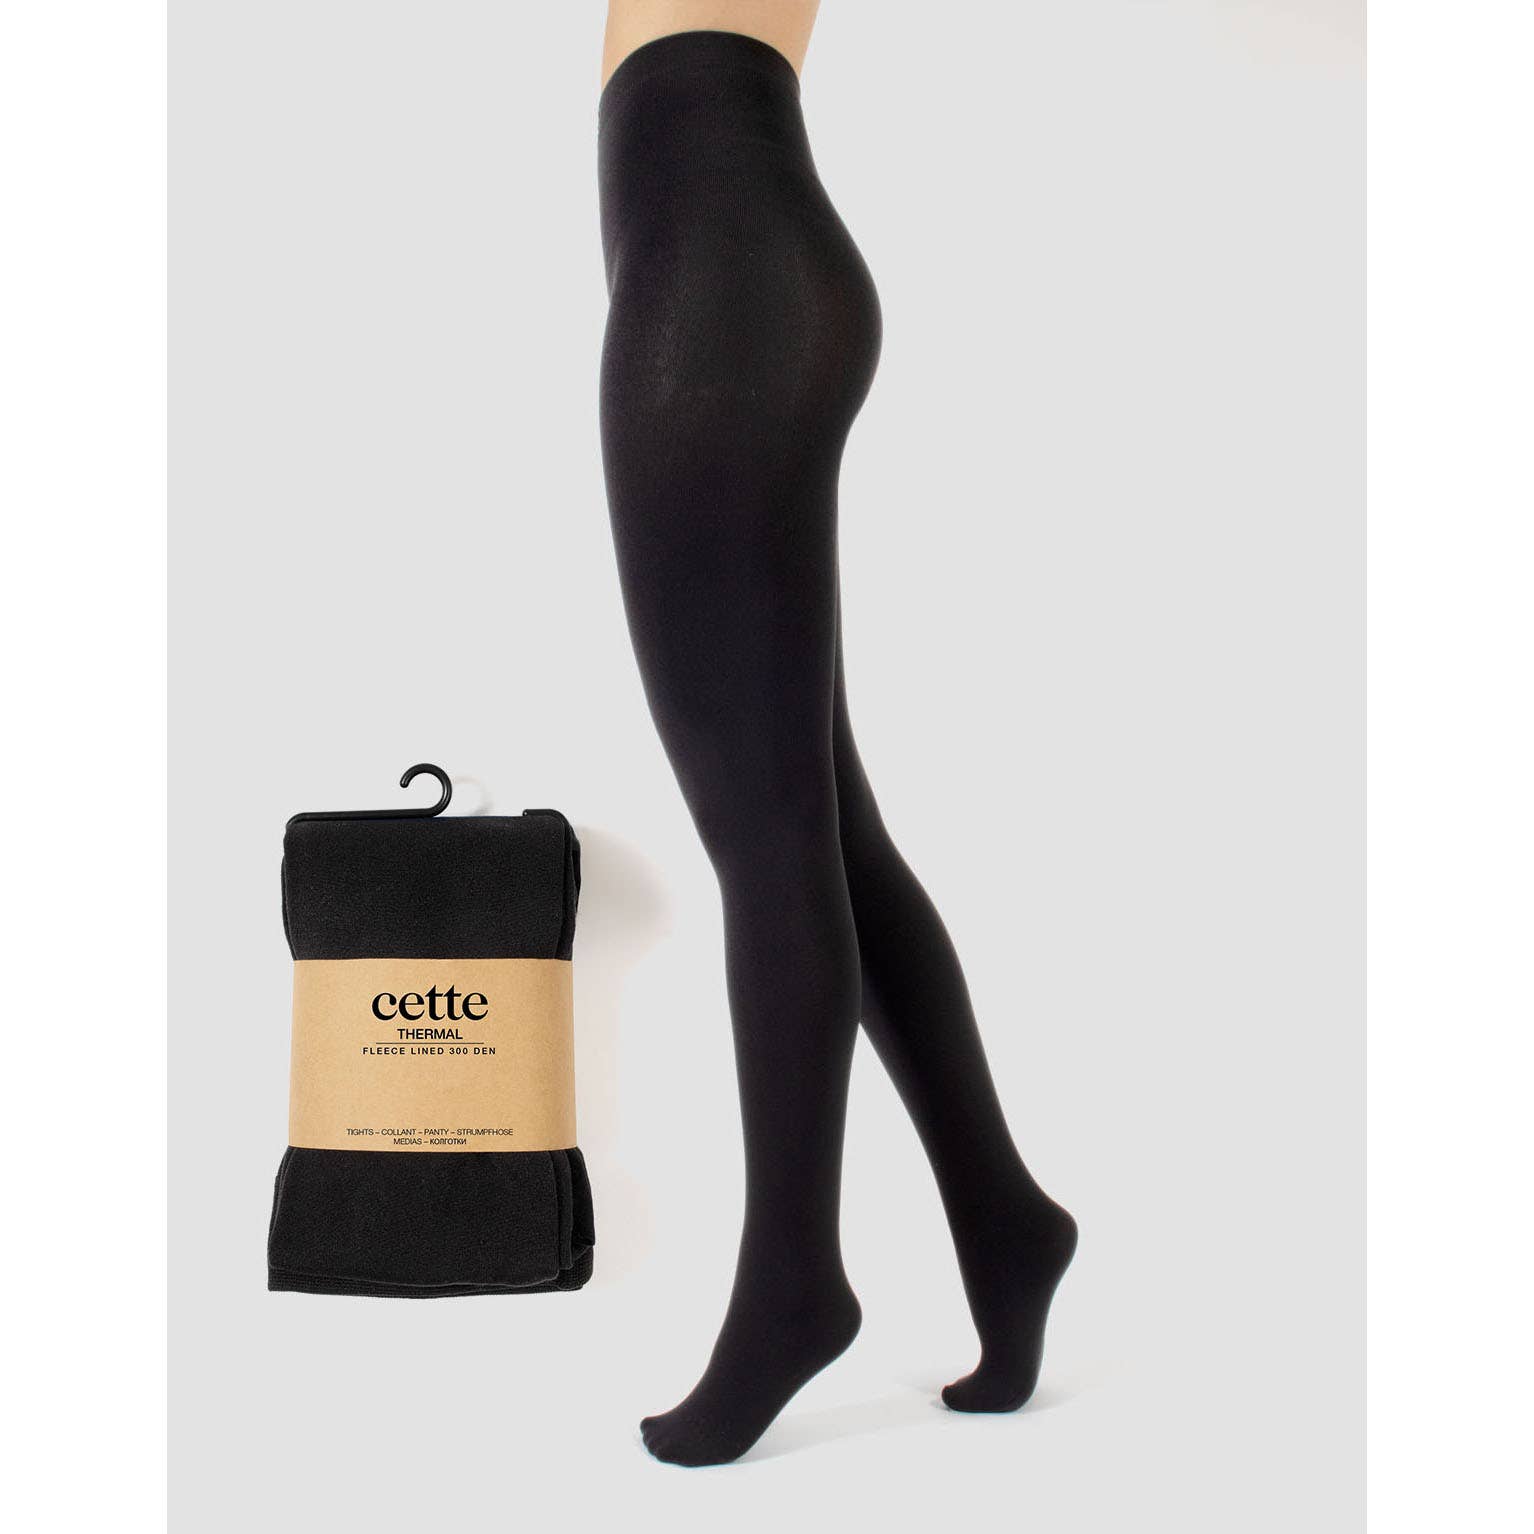 Cette black thermal fleece lined opaque tights – The Revival